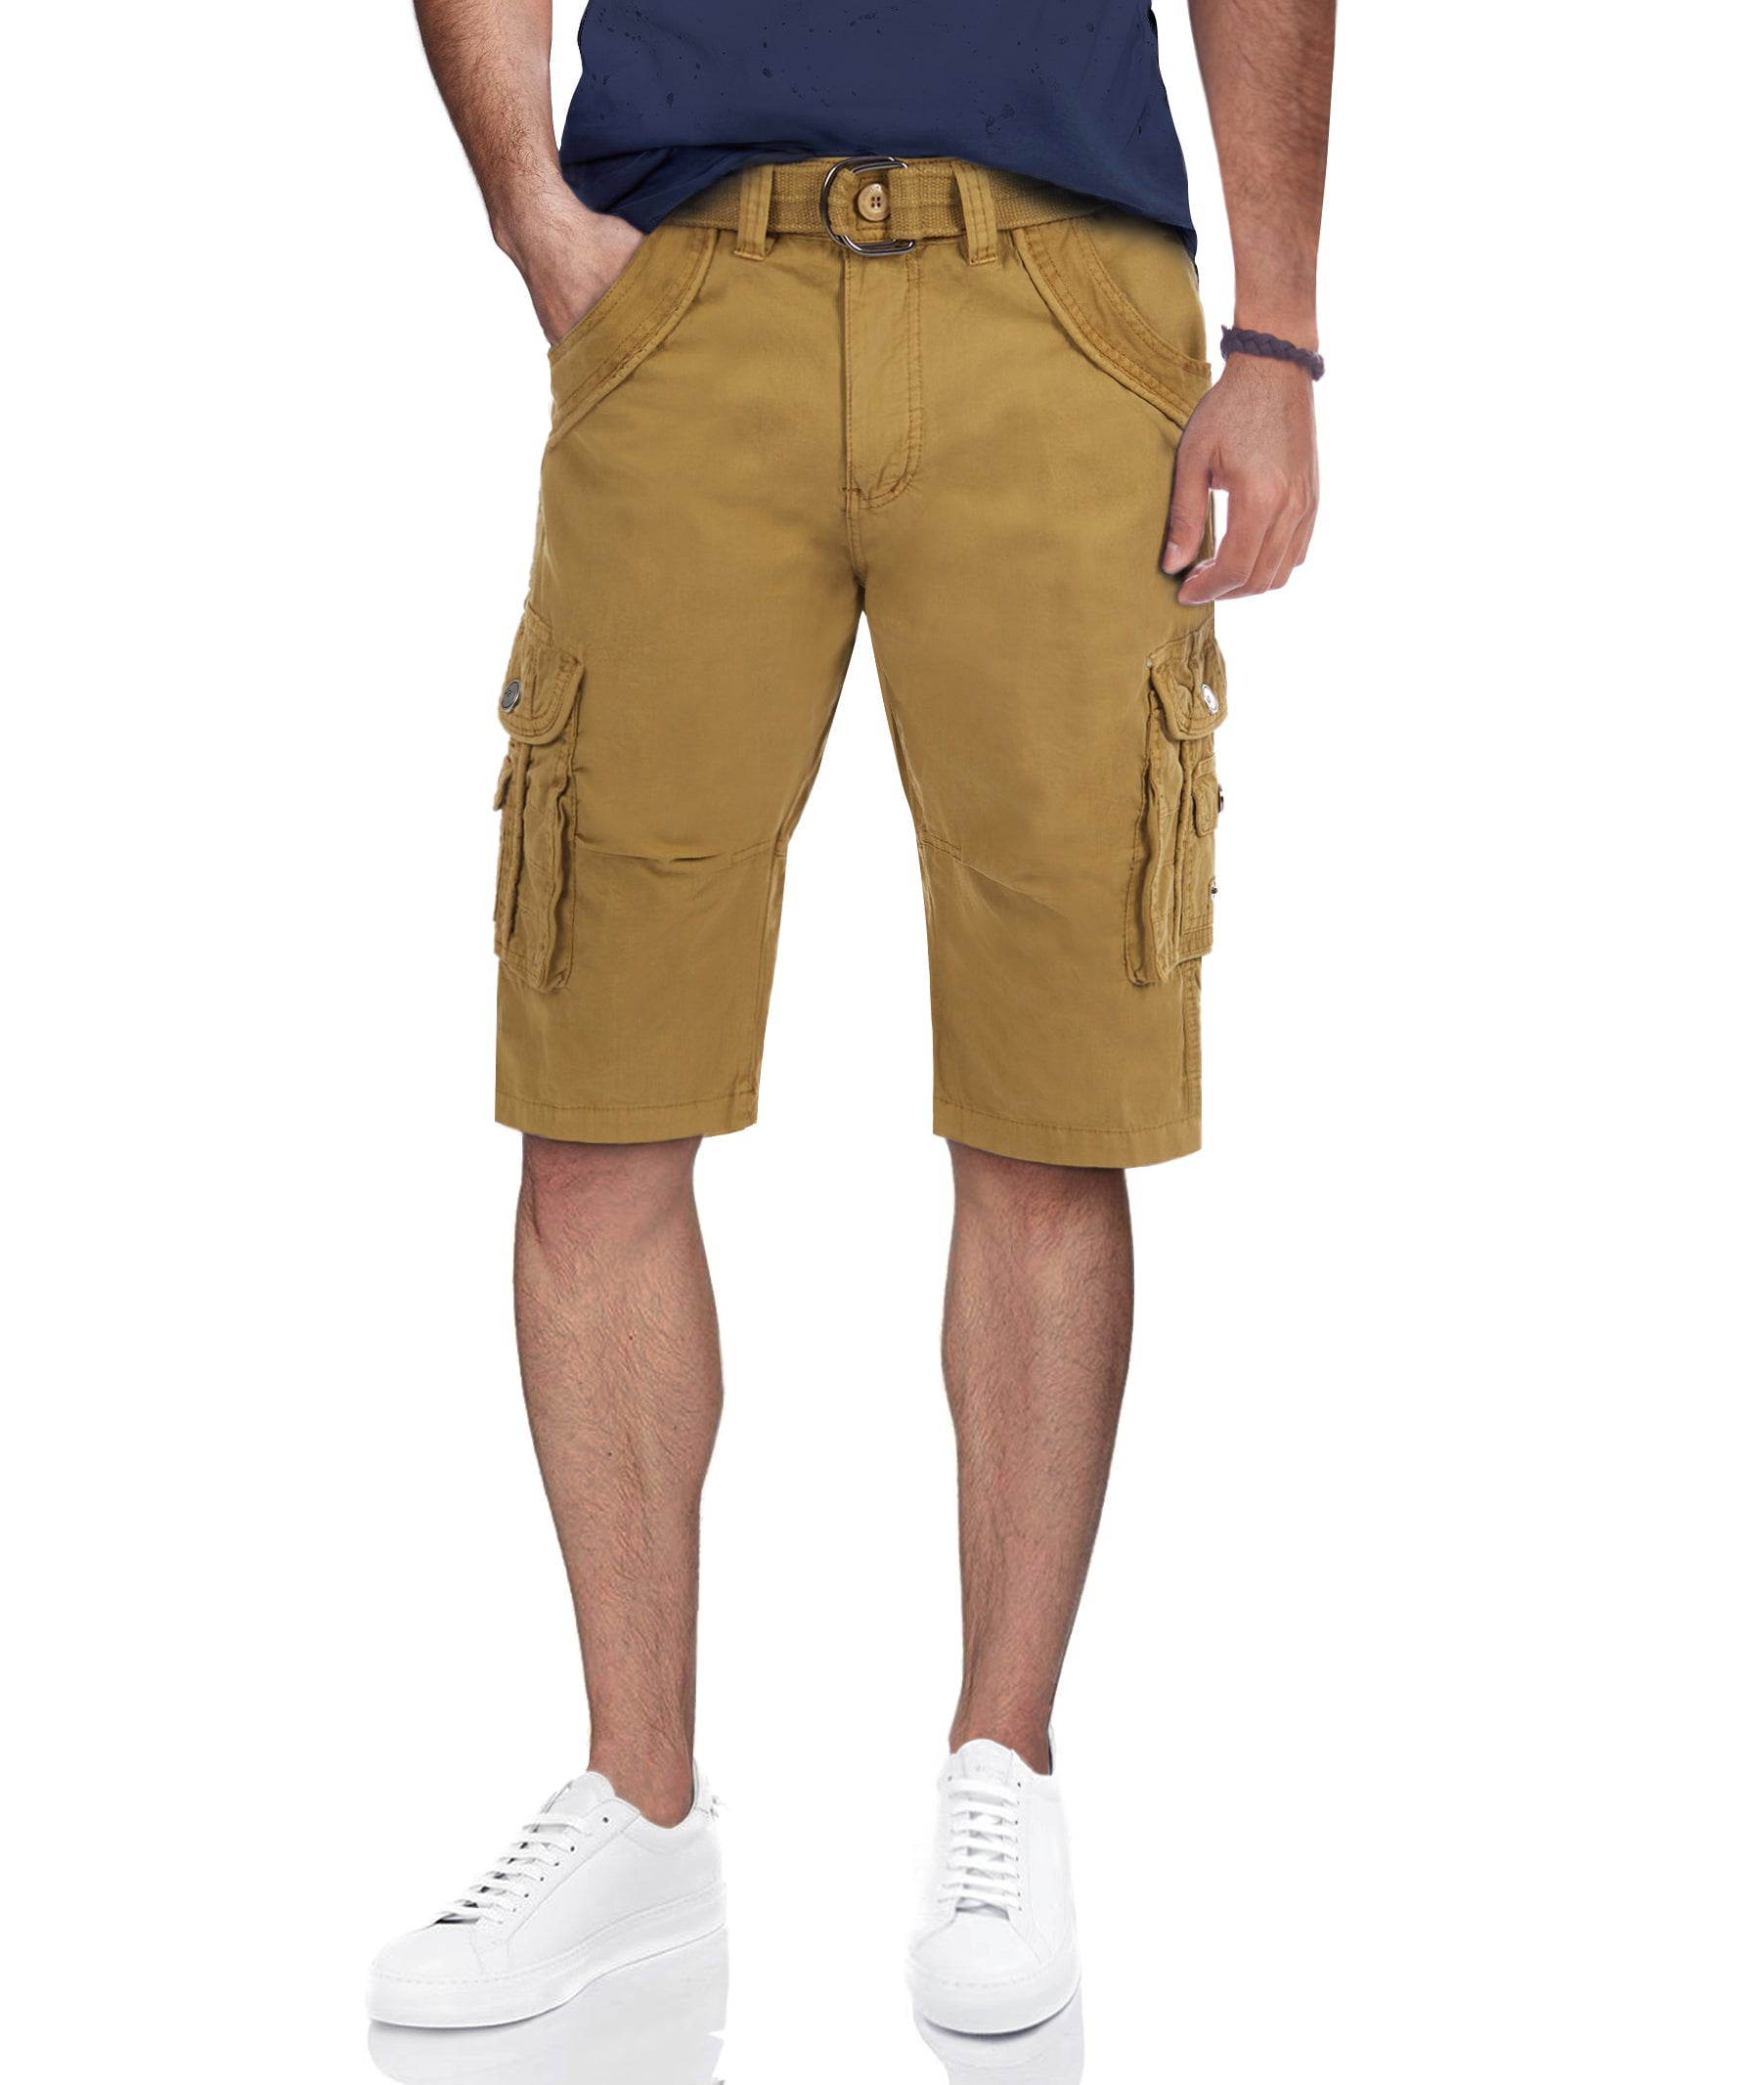 Mens Tactical Bermuda Cargo Shorts Camo and Solid Colors 12.5 Long Inseam Knee Length Classic Fit Multi Pocket